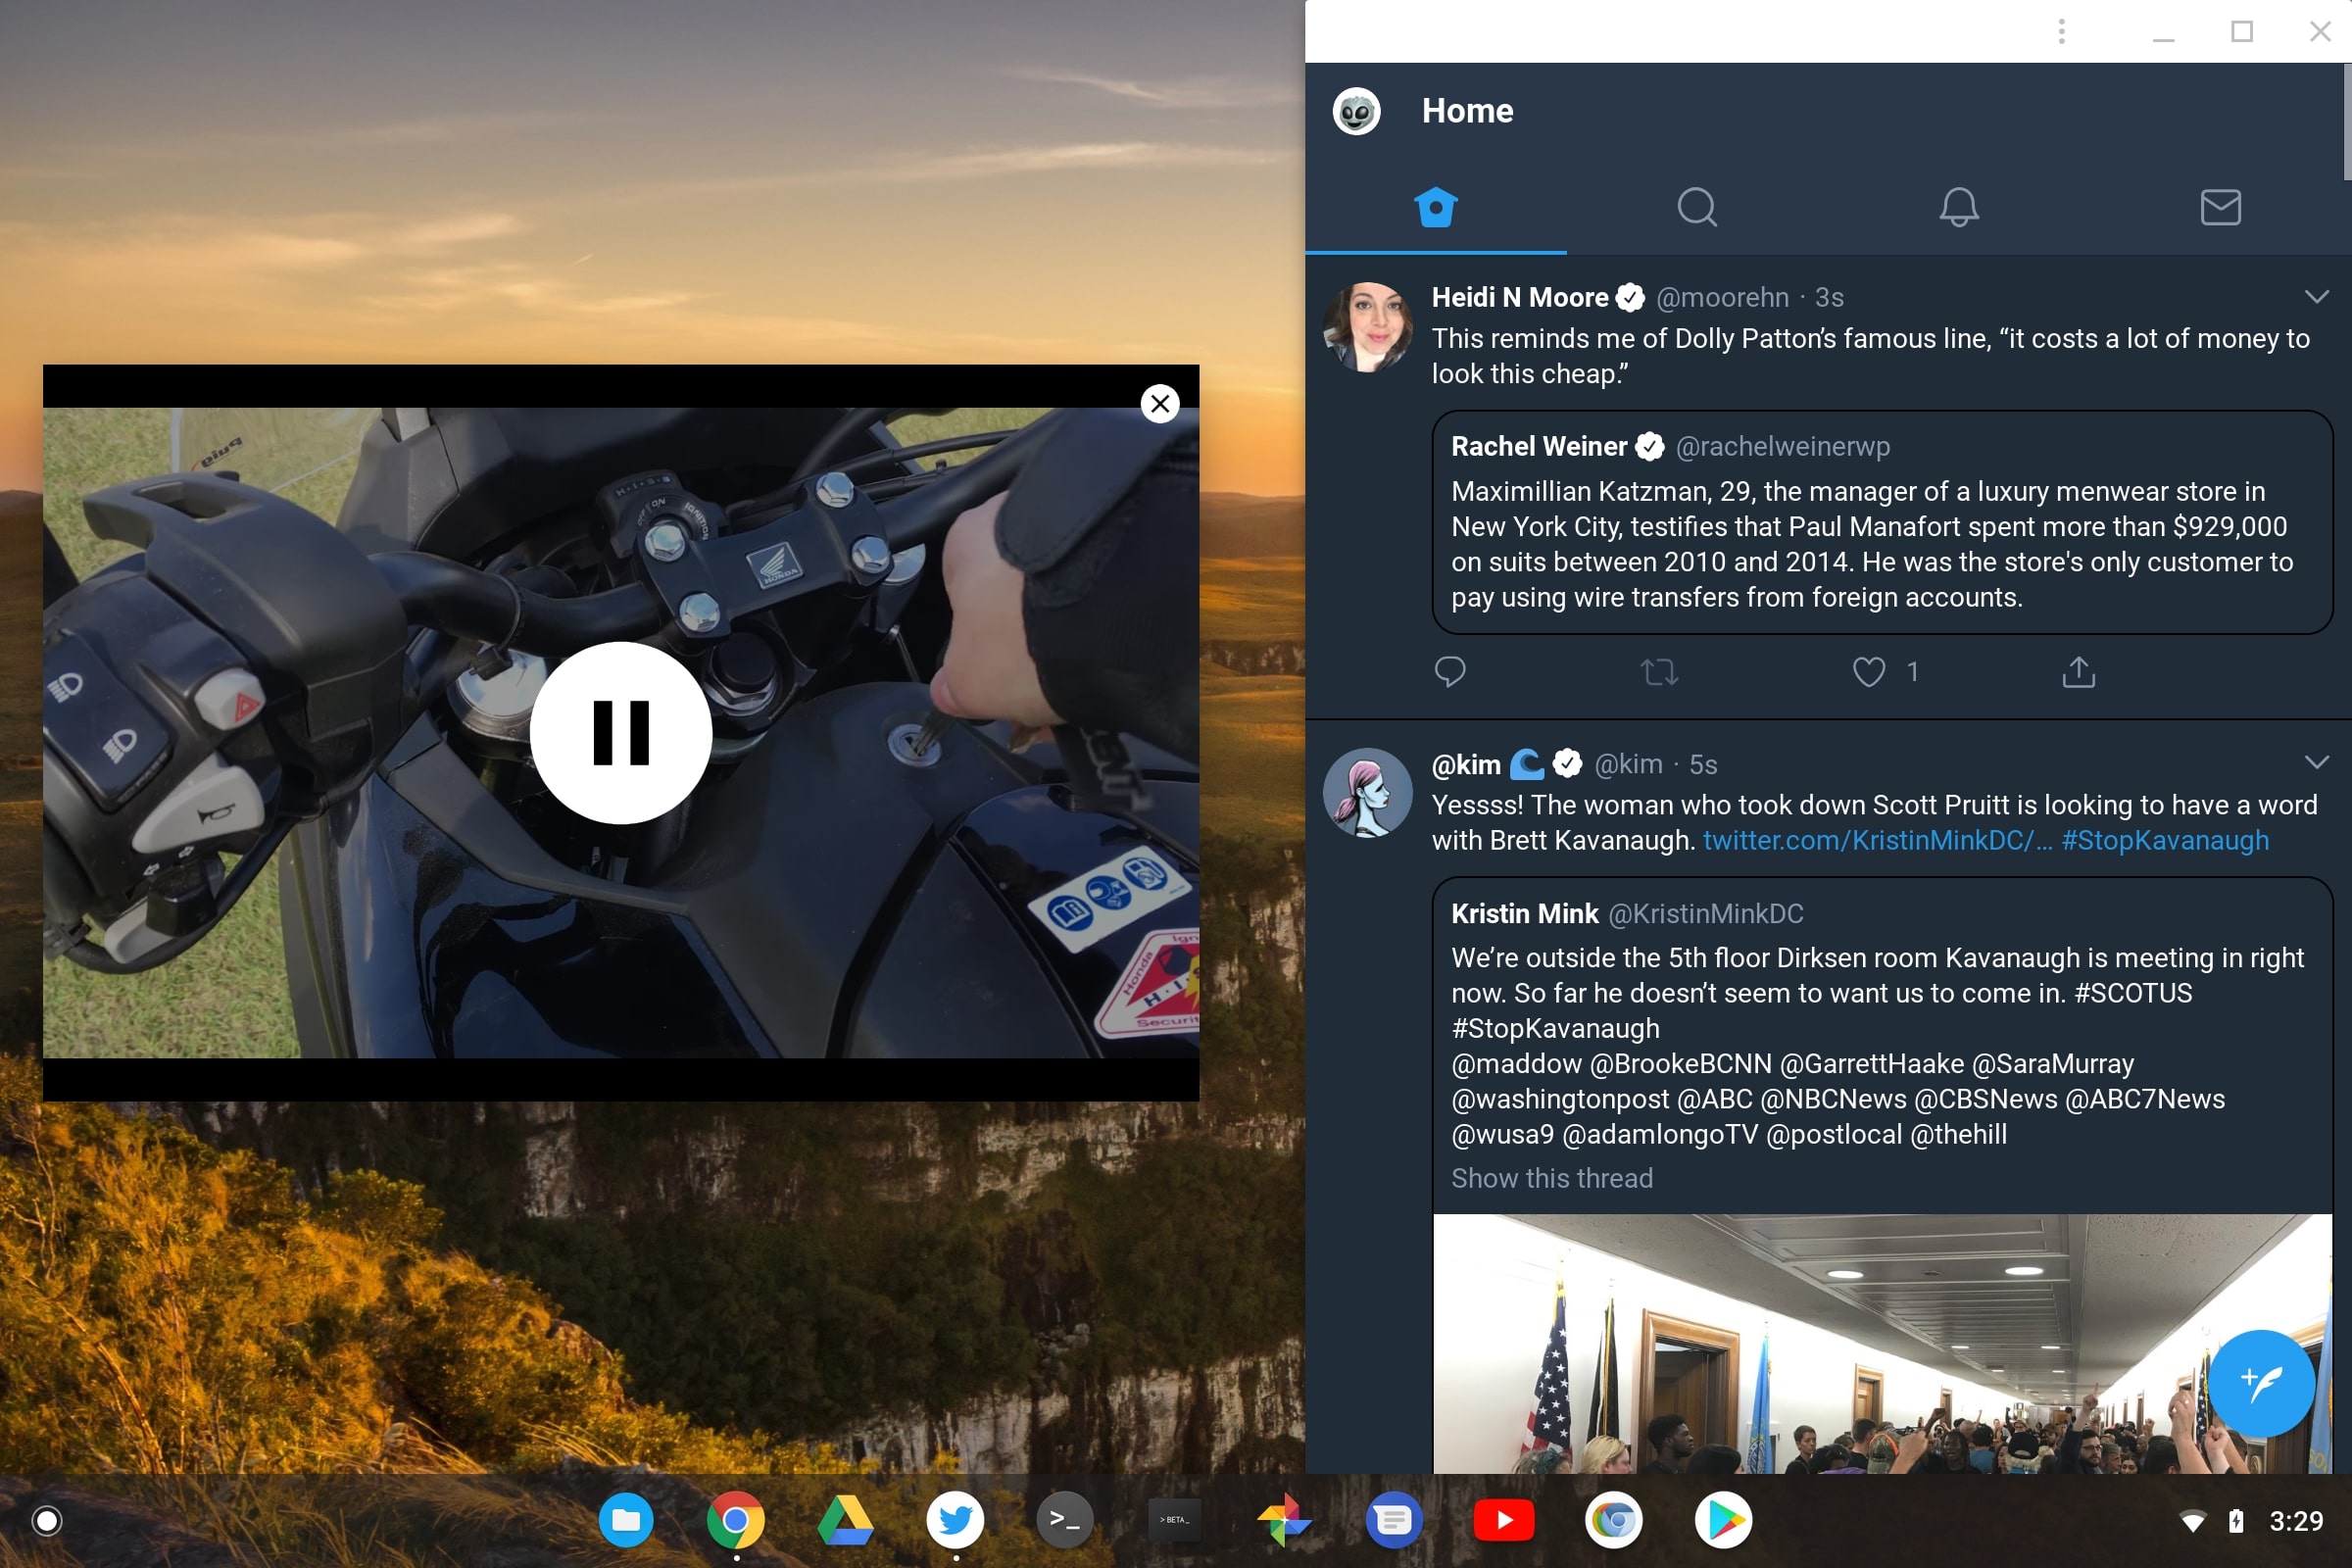 New Chrome OS update brings Smart Text Selection, Continue Reading and more to Dev Channel